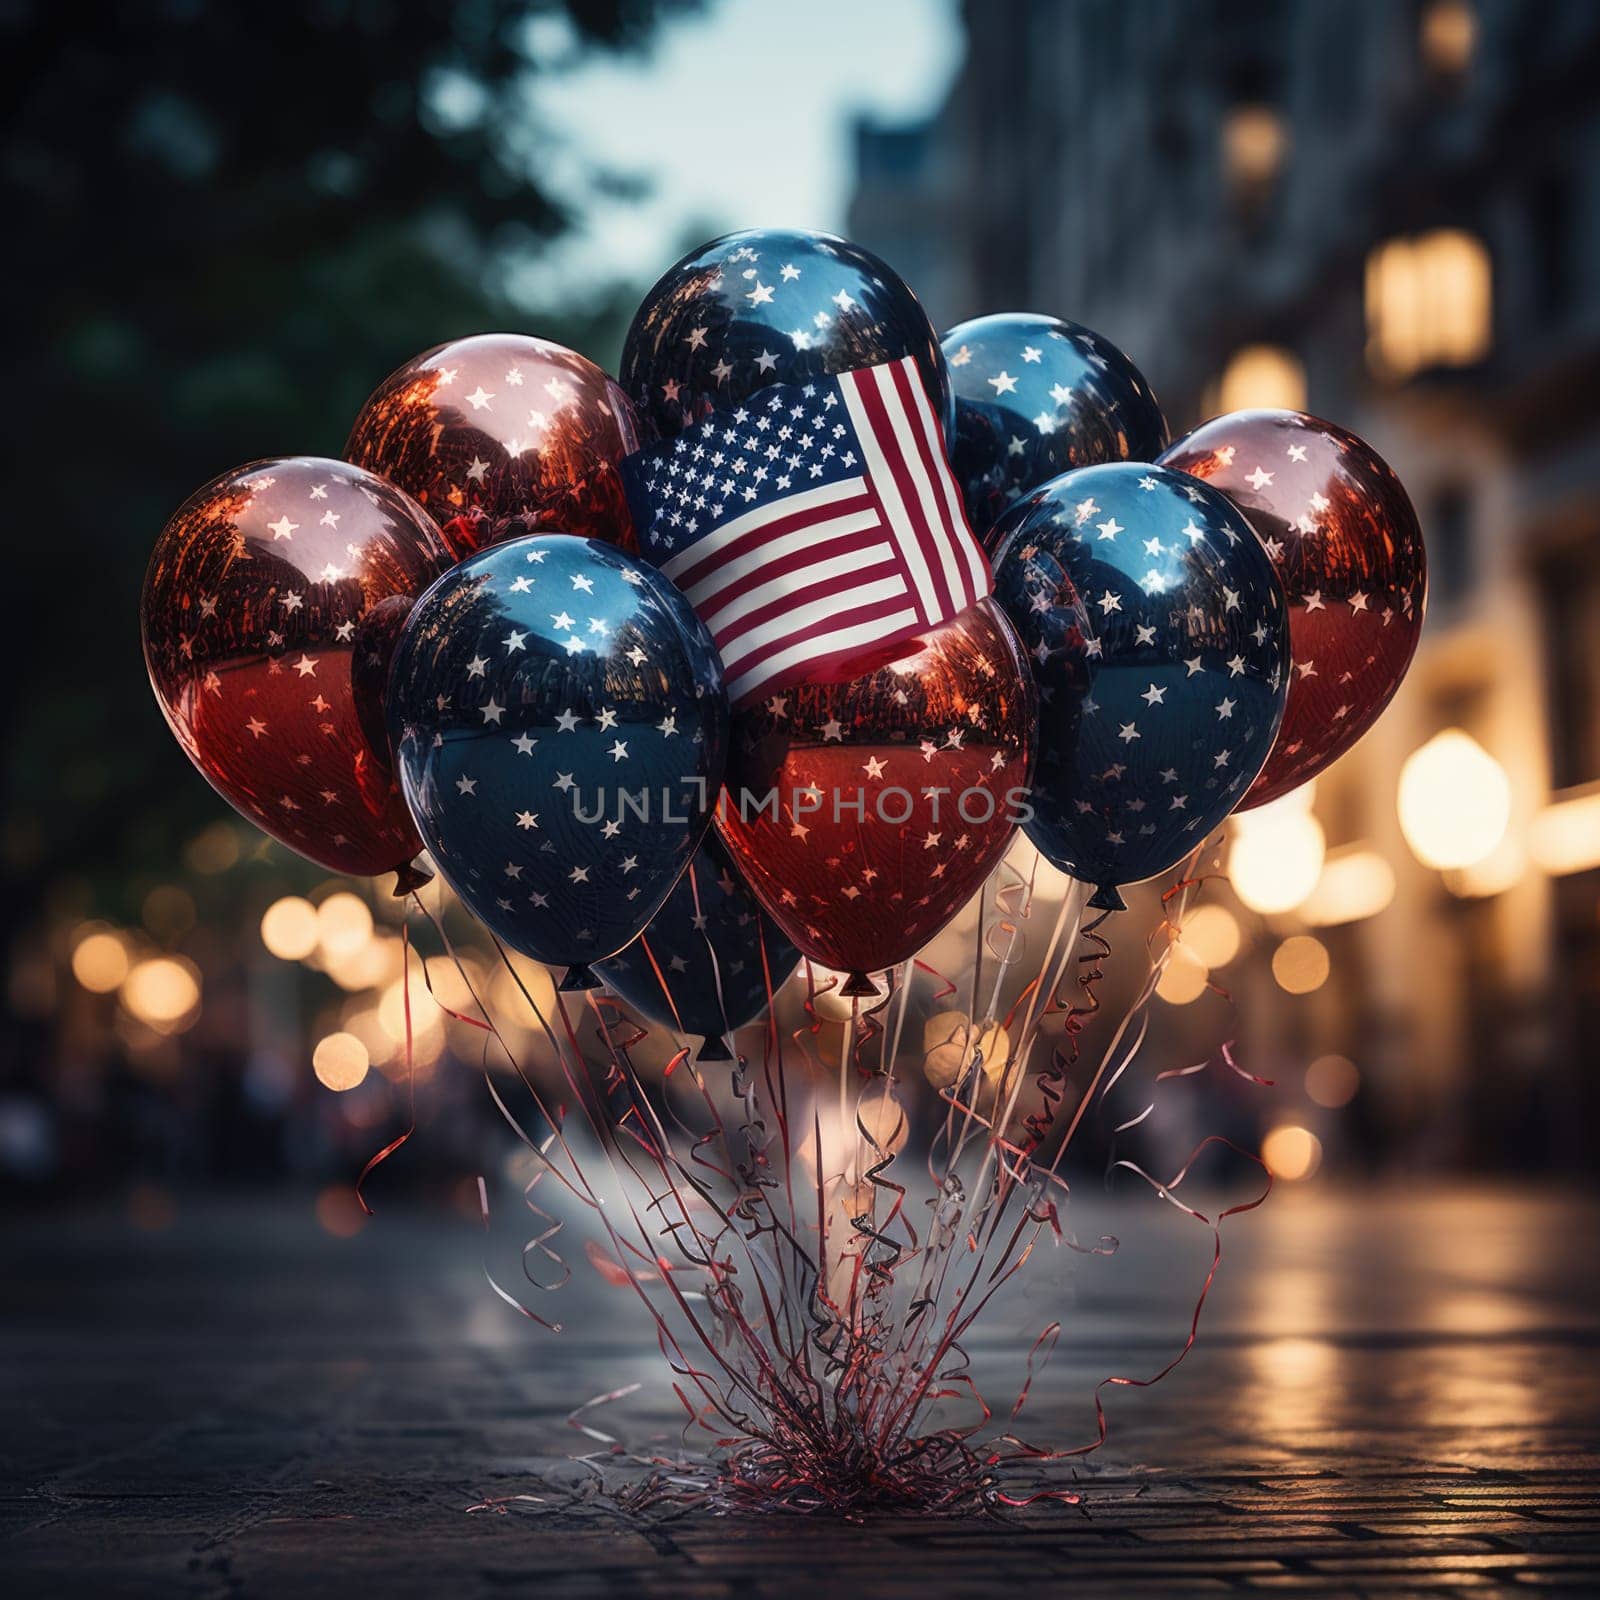 Multiple balloons adorned with the American flag design, creating a festive and patriotic display.